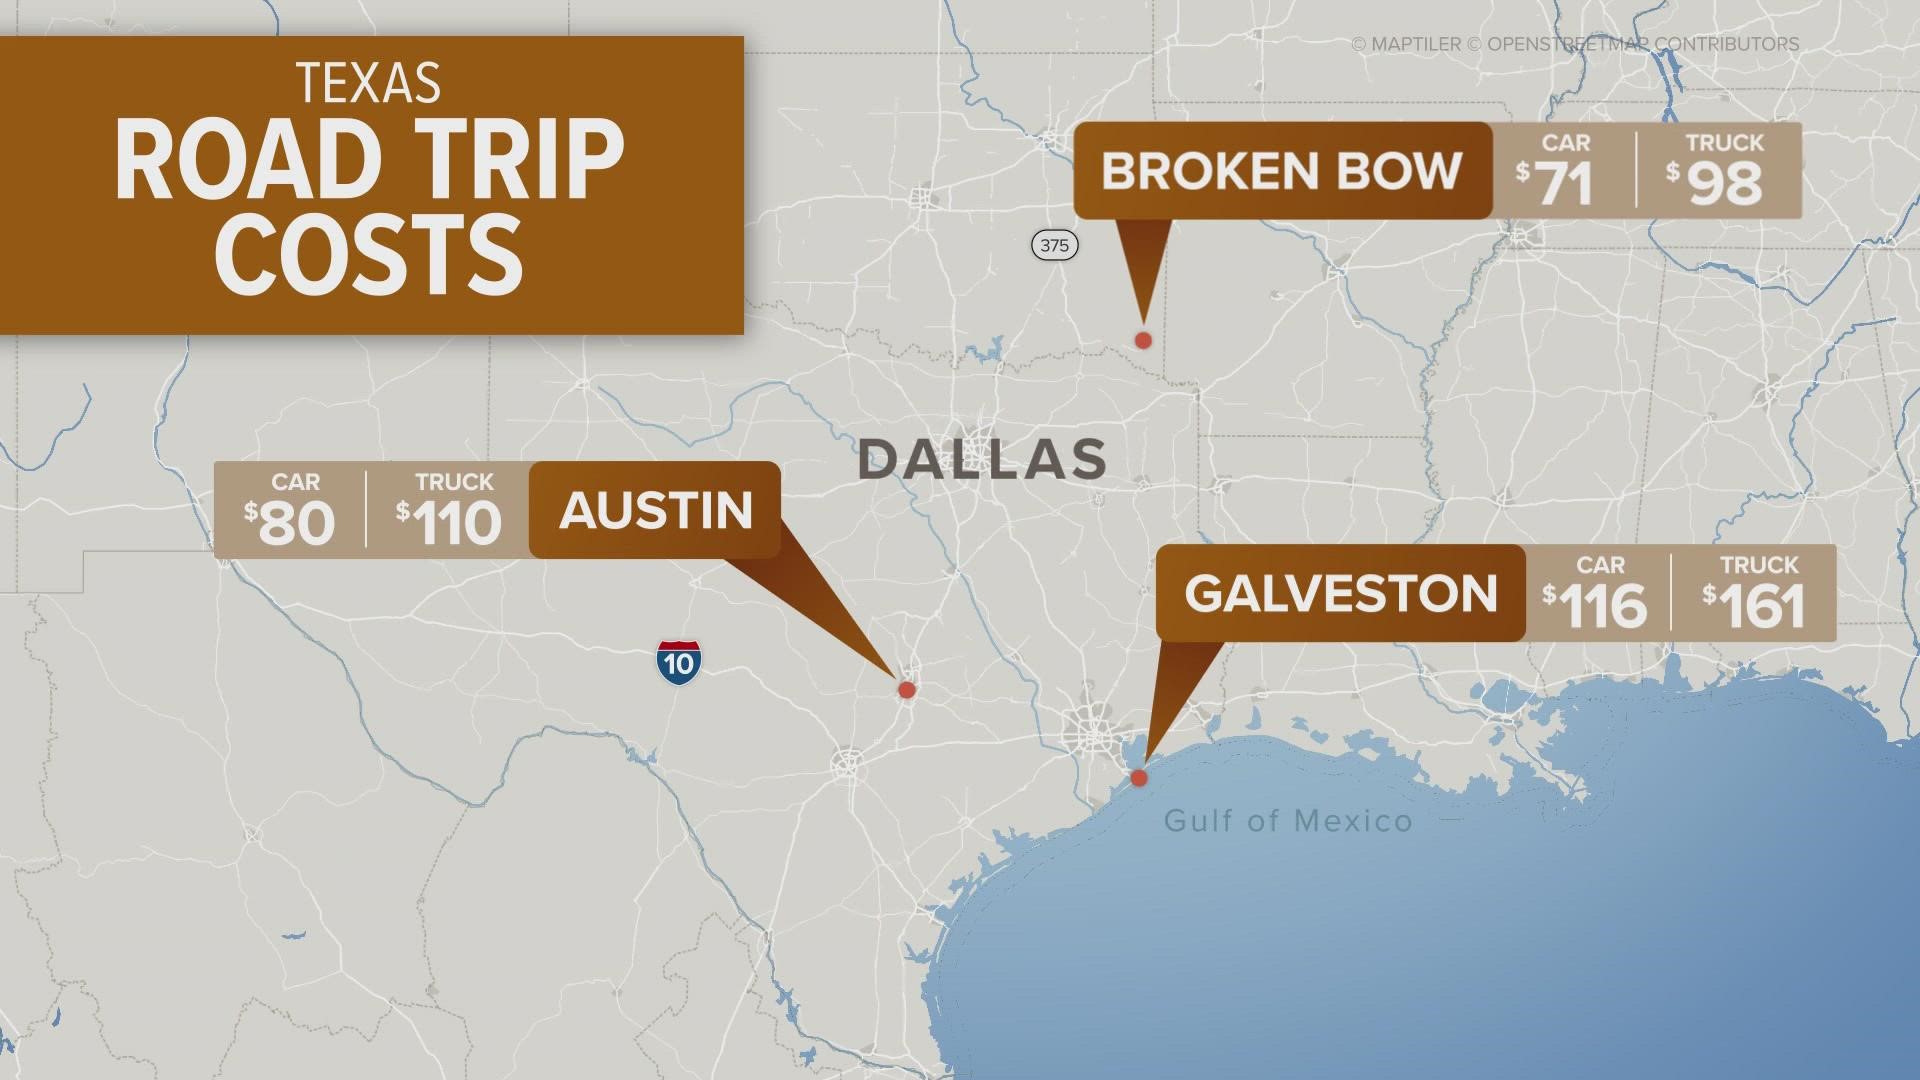 We broke down the cost of several Texas road trips from DFW, including the Hill Country, Big Bend and South Padre Island.